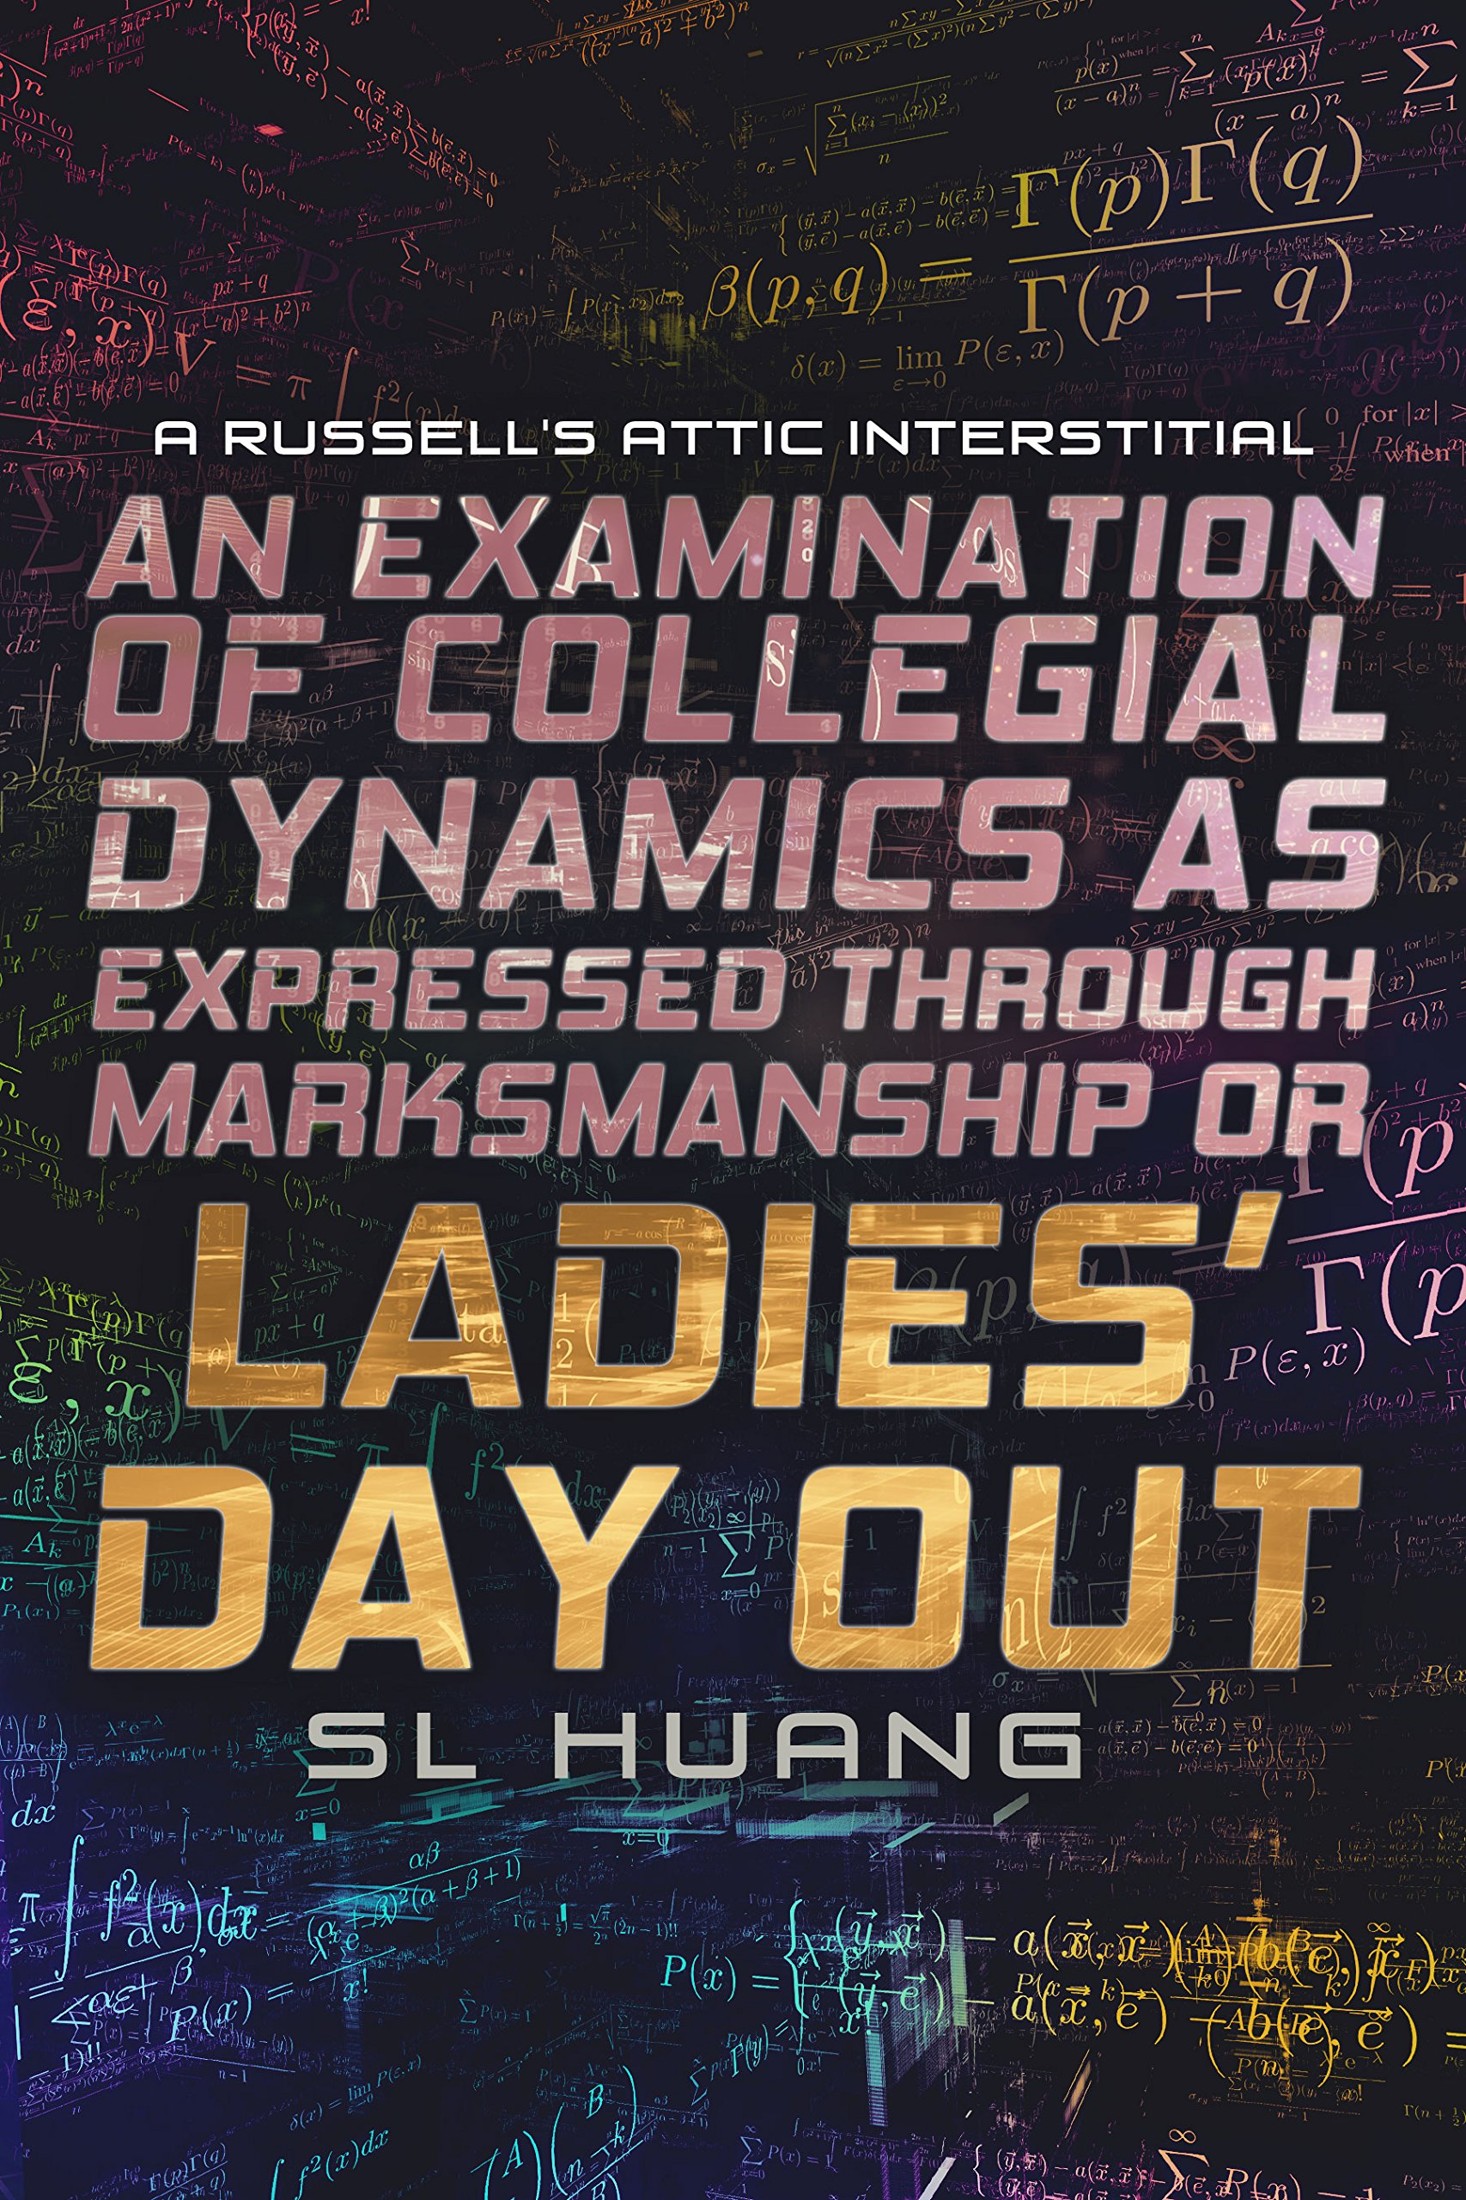 An Examination of Collegial Dynamics as Expressed Through Marksmanship, Or, LADIES' DAY OUT: A Russell's Attic Interstitial